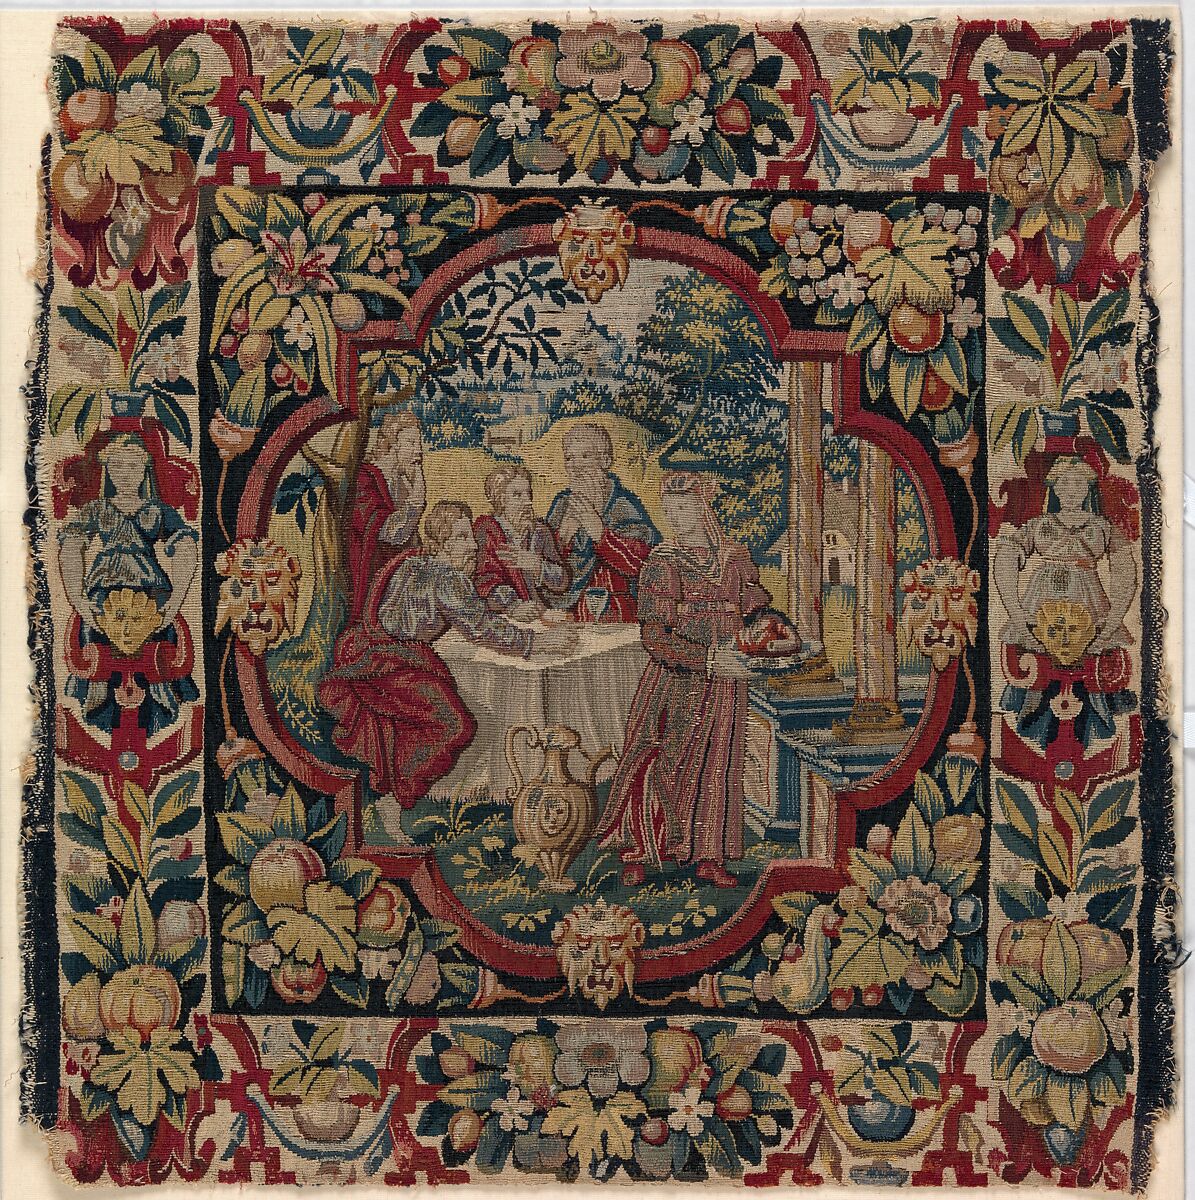 Abraham Entertaining the Angels from the Story of Abraham, Wool, silk, silver-gilt thread (21 warps per inch, 9 per cm.), Flemish 